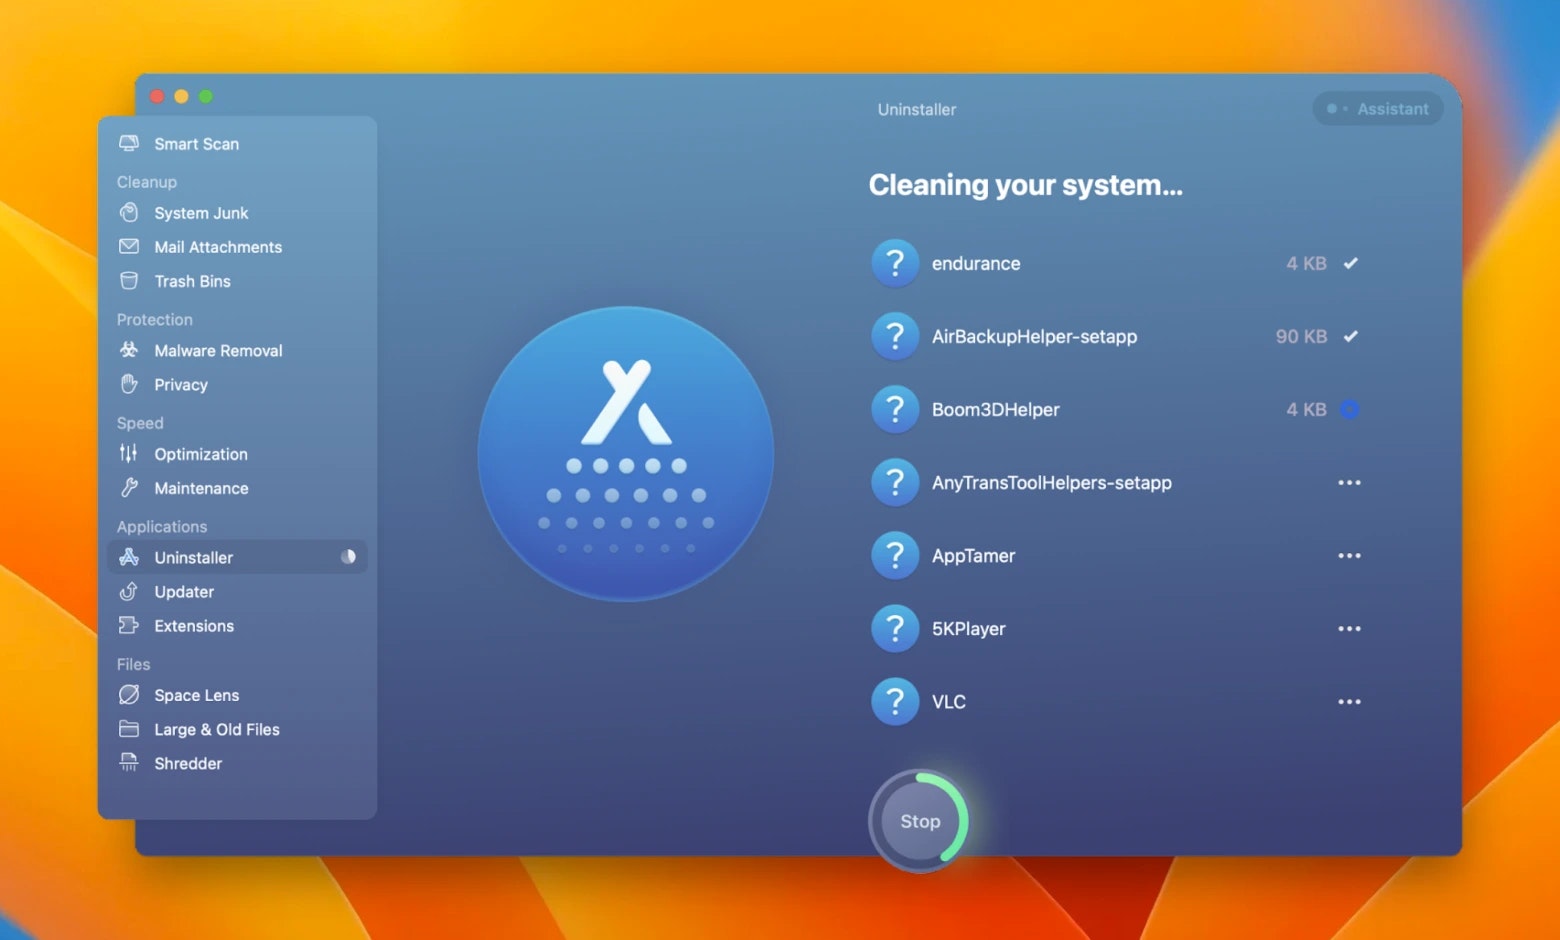 Cleaning your system...